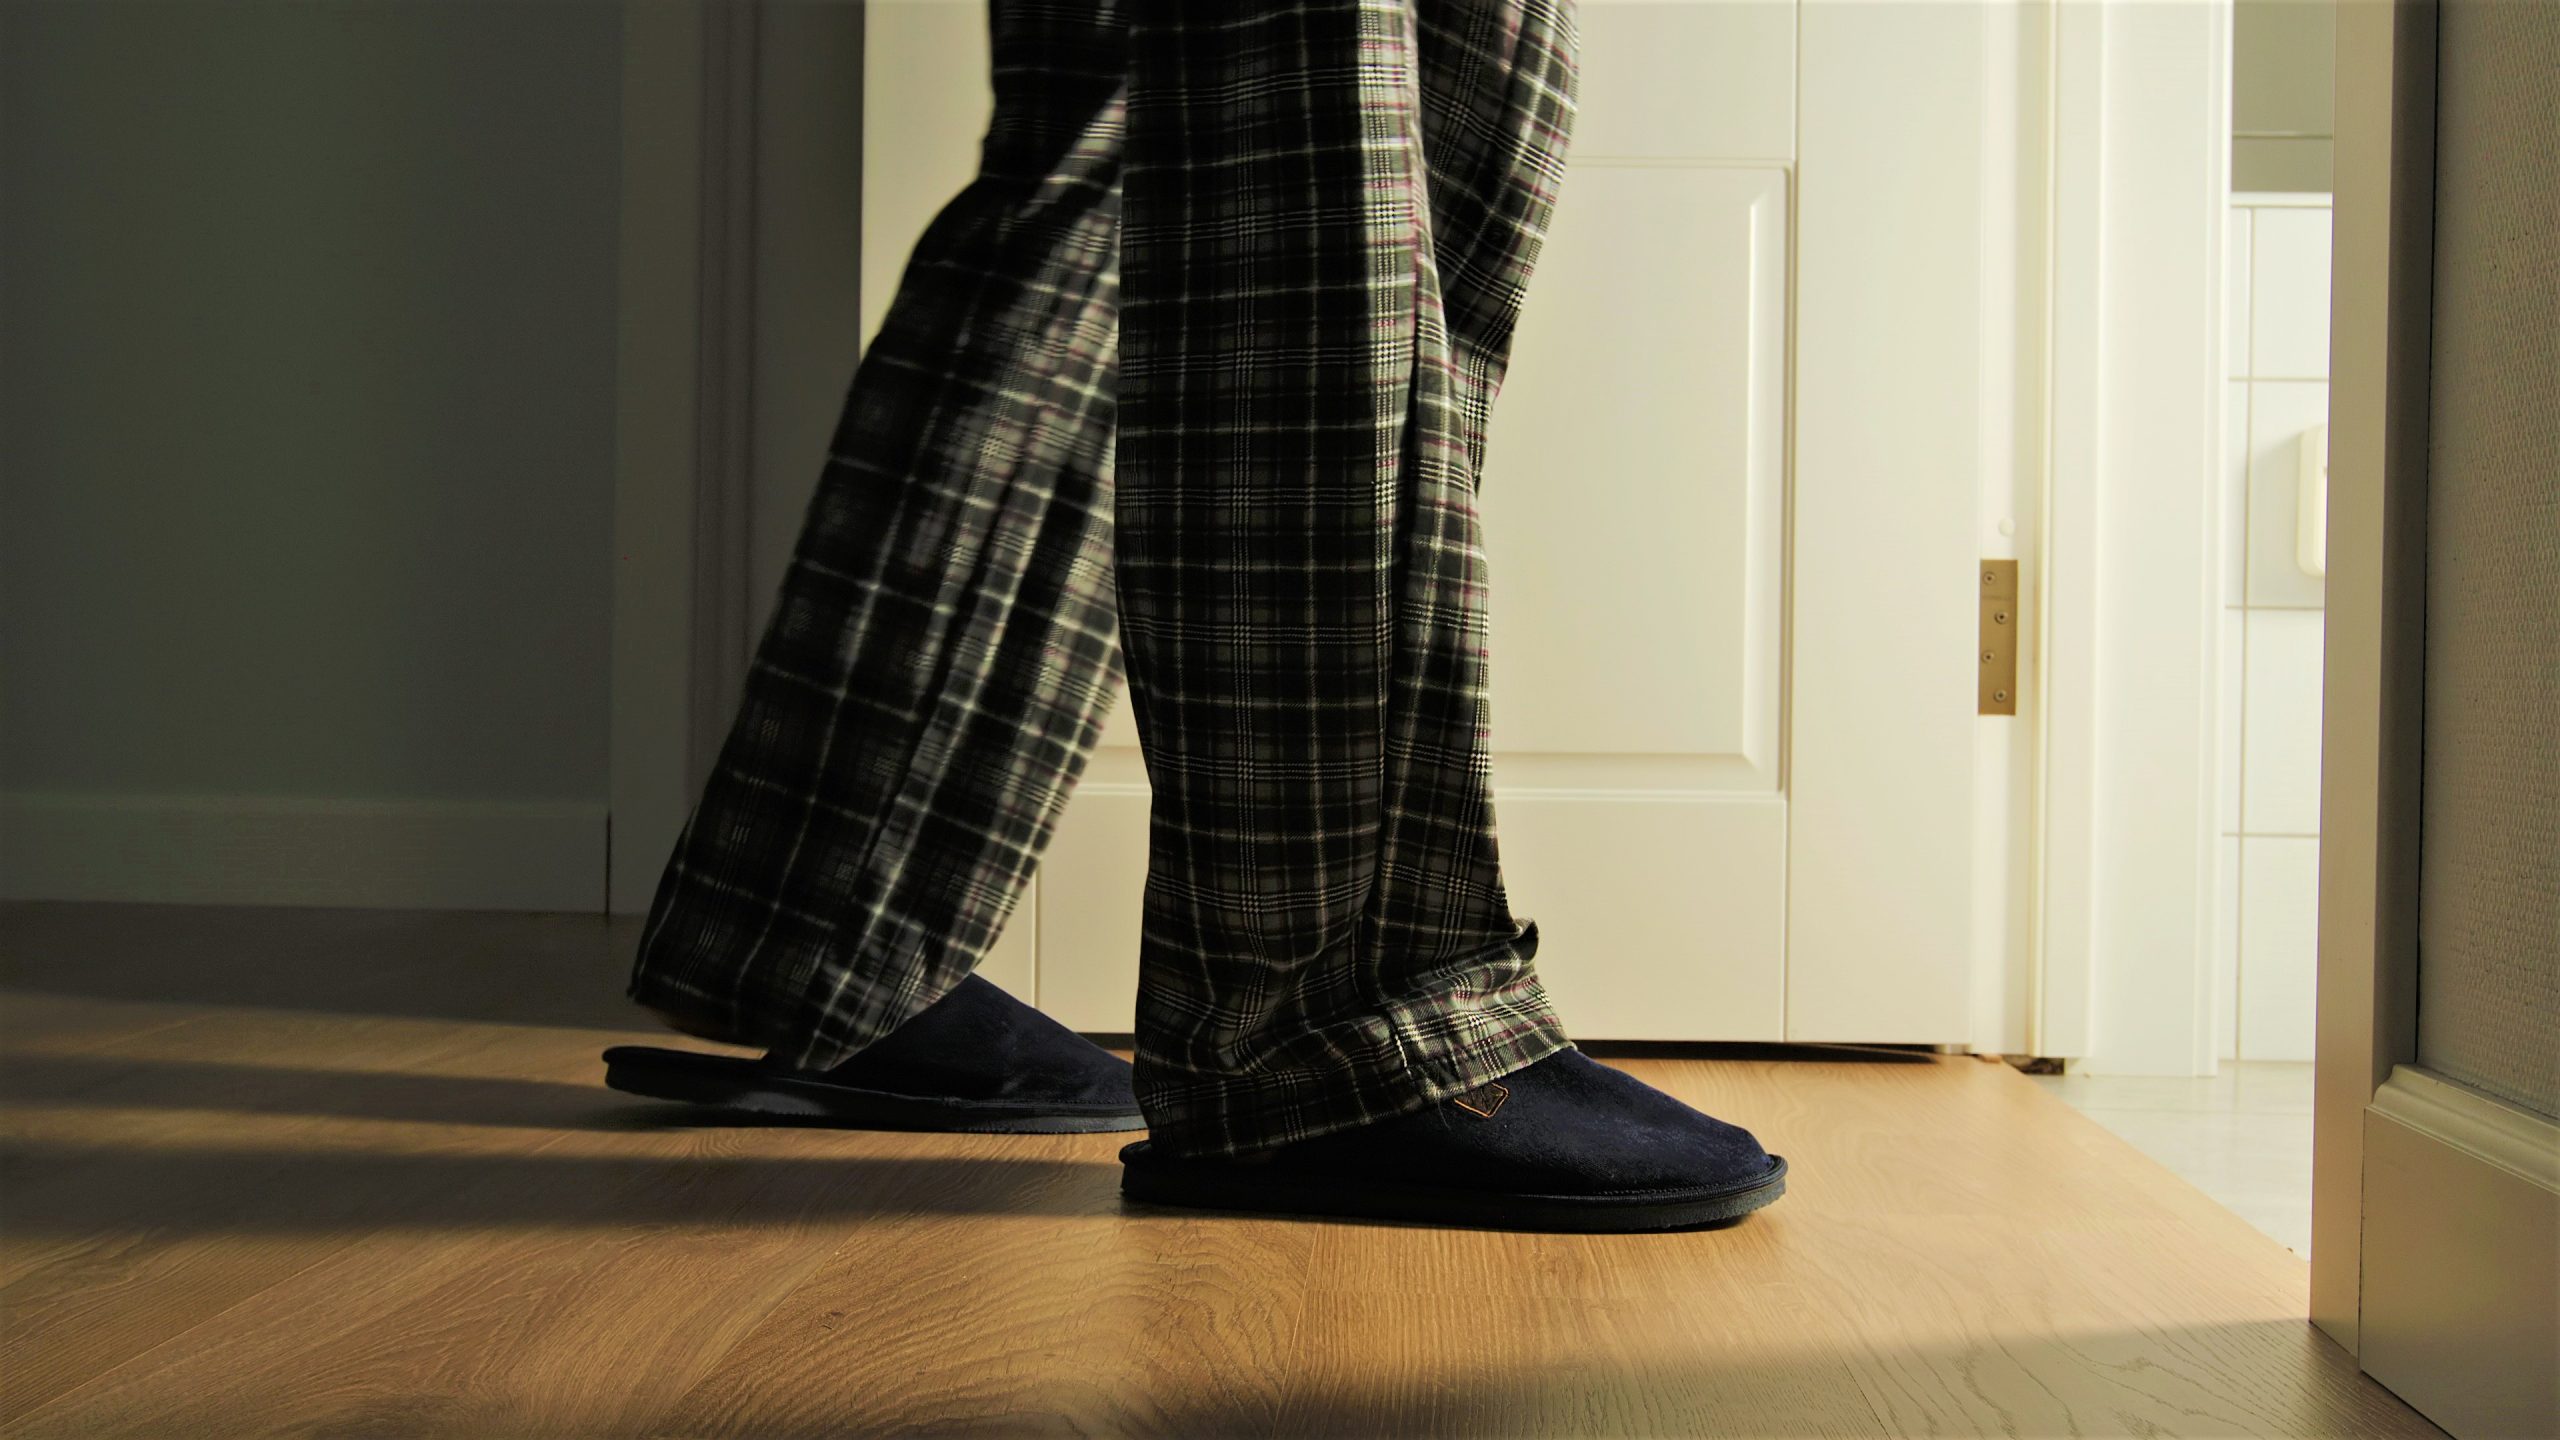 Aged Man In A Pajamas And Slippers Walks To A Toilet At Home In The Night